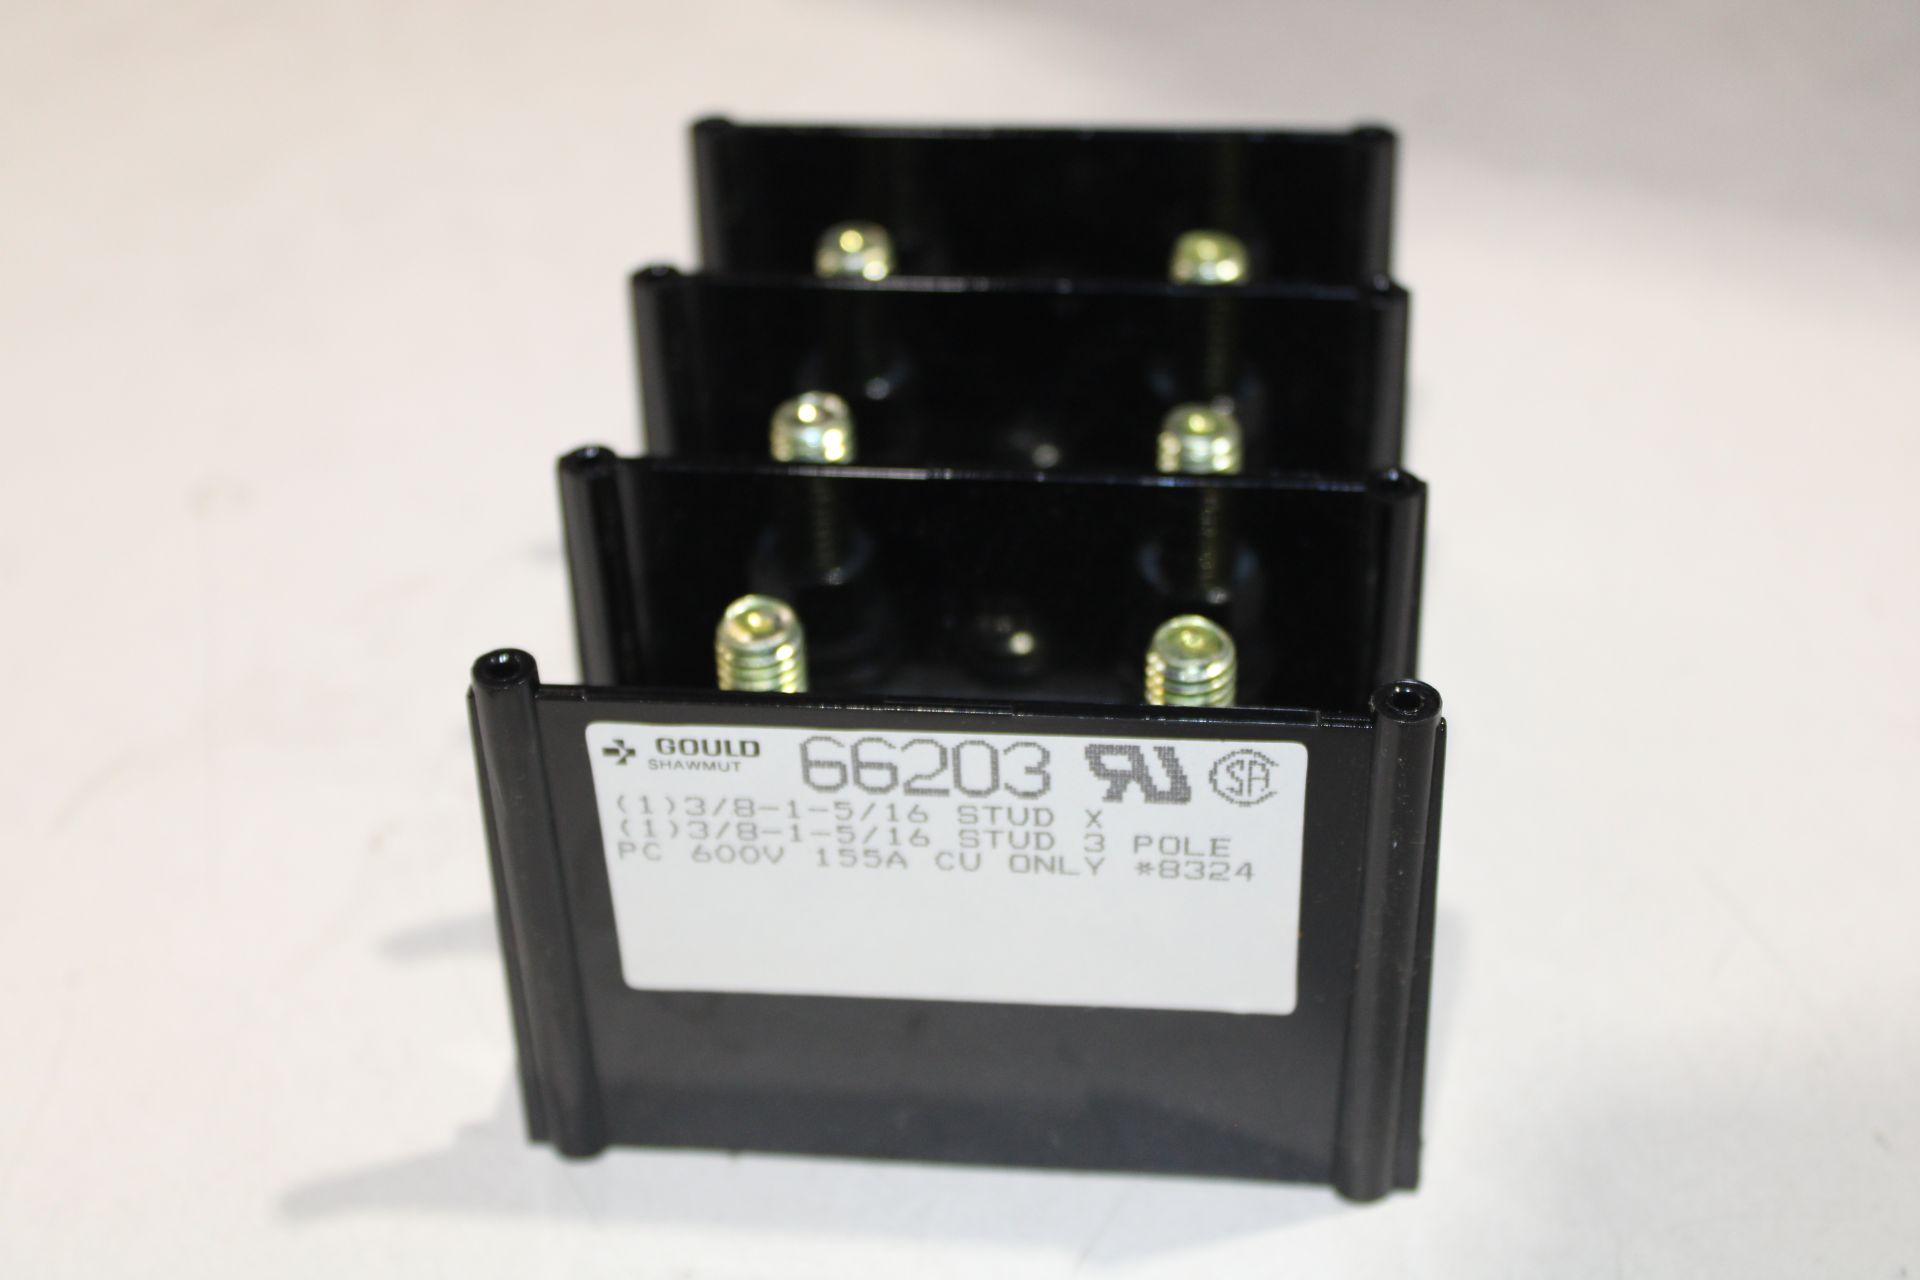 17x Gould 66203 Other Power Distribution Contacts and Accessories EA